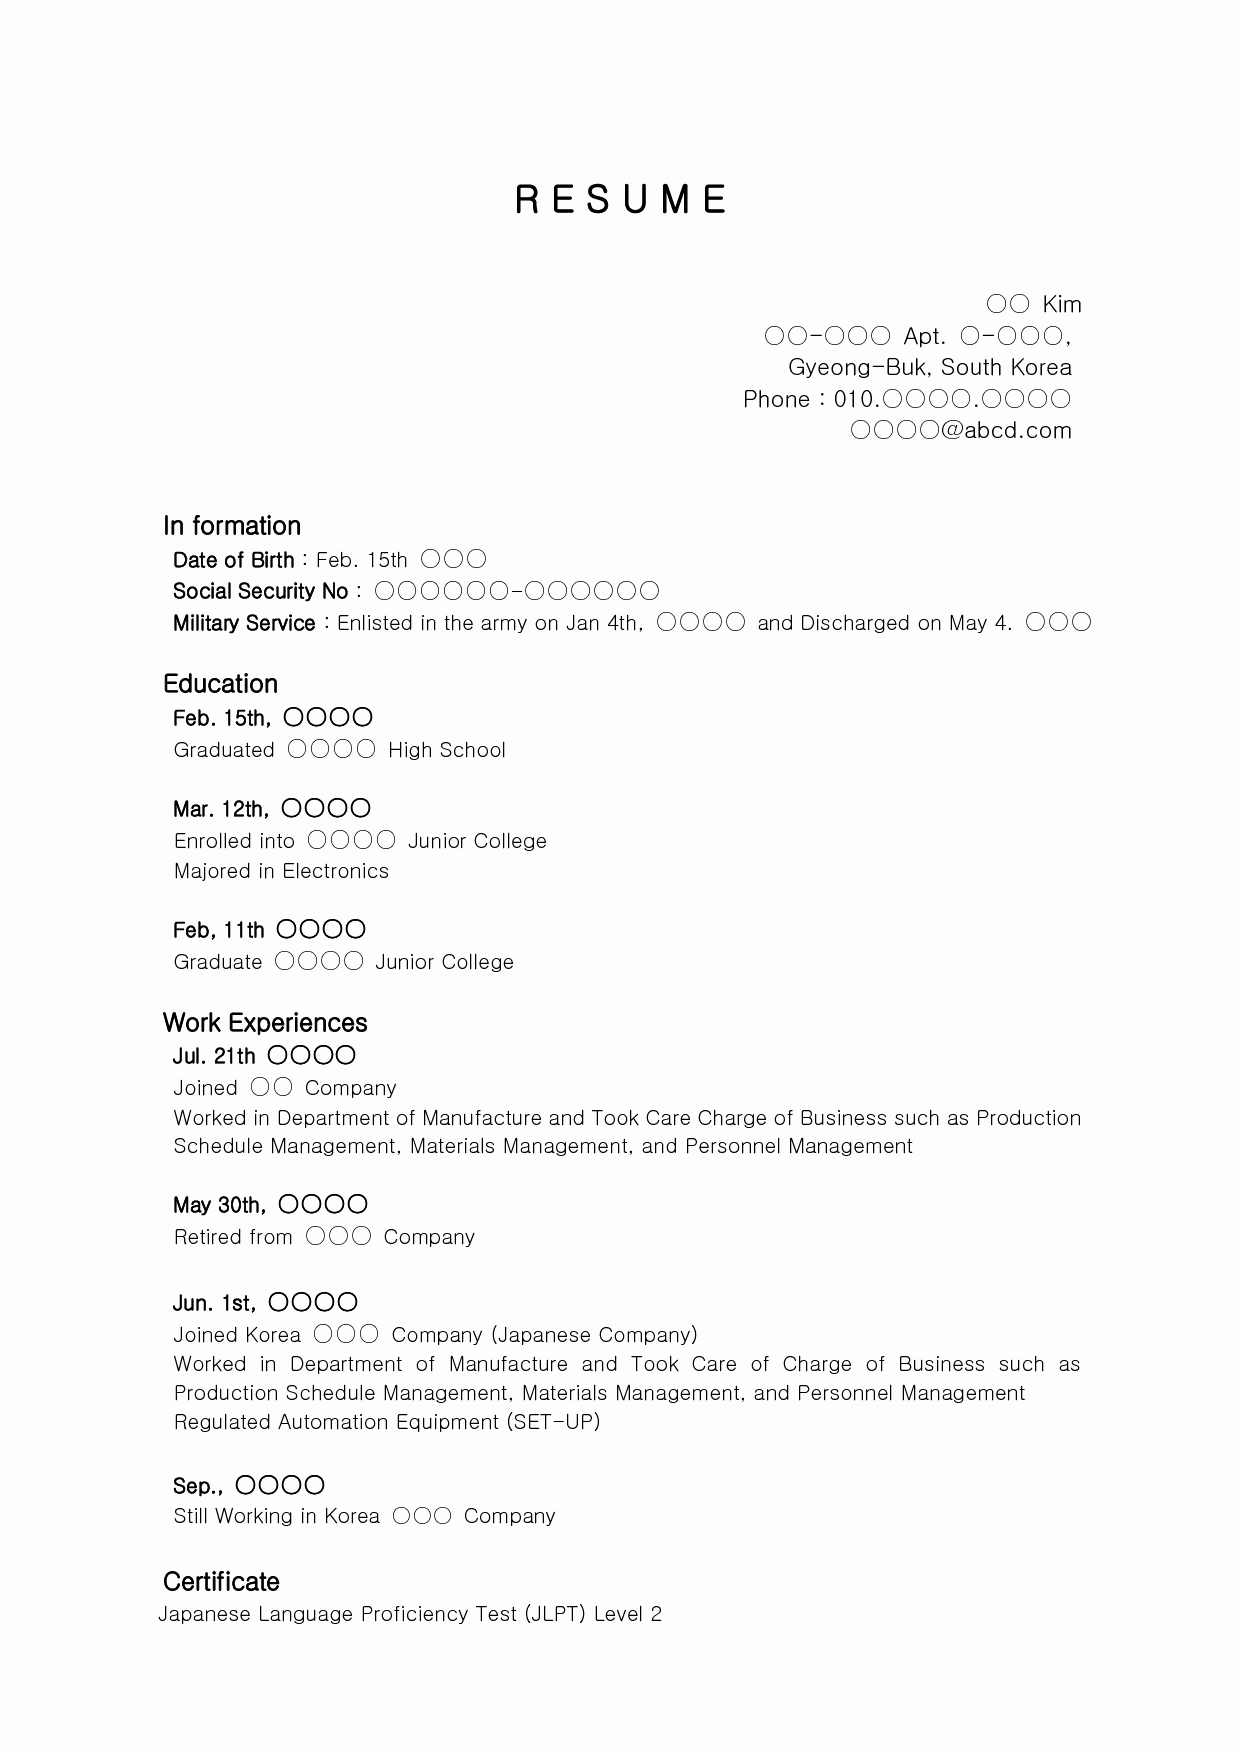 Sample Resume for High School Graduate with No Work